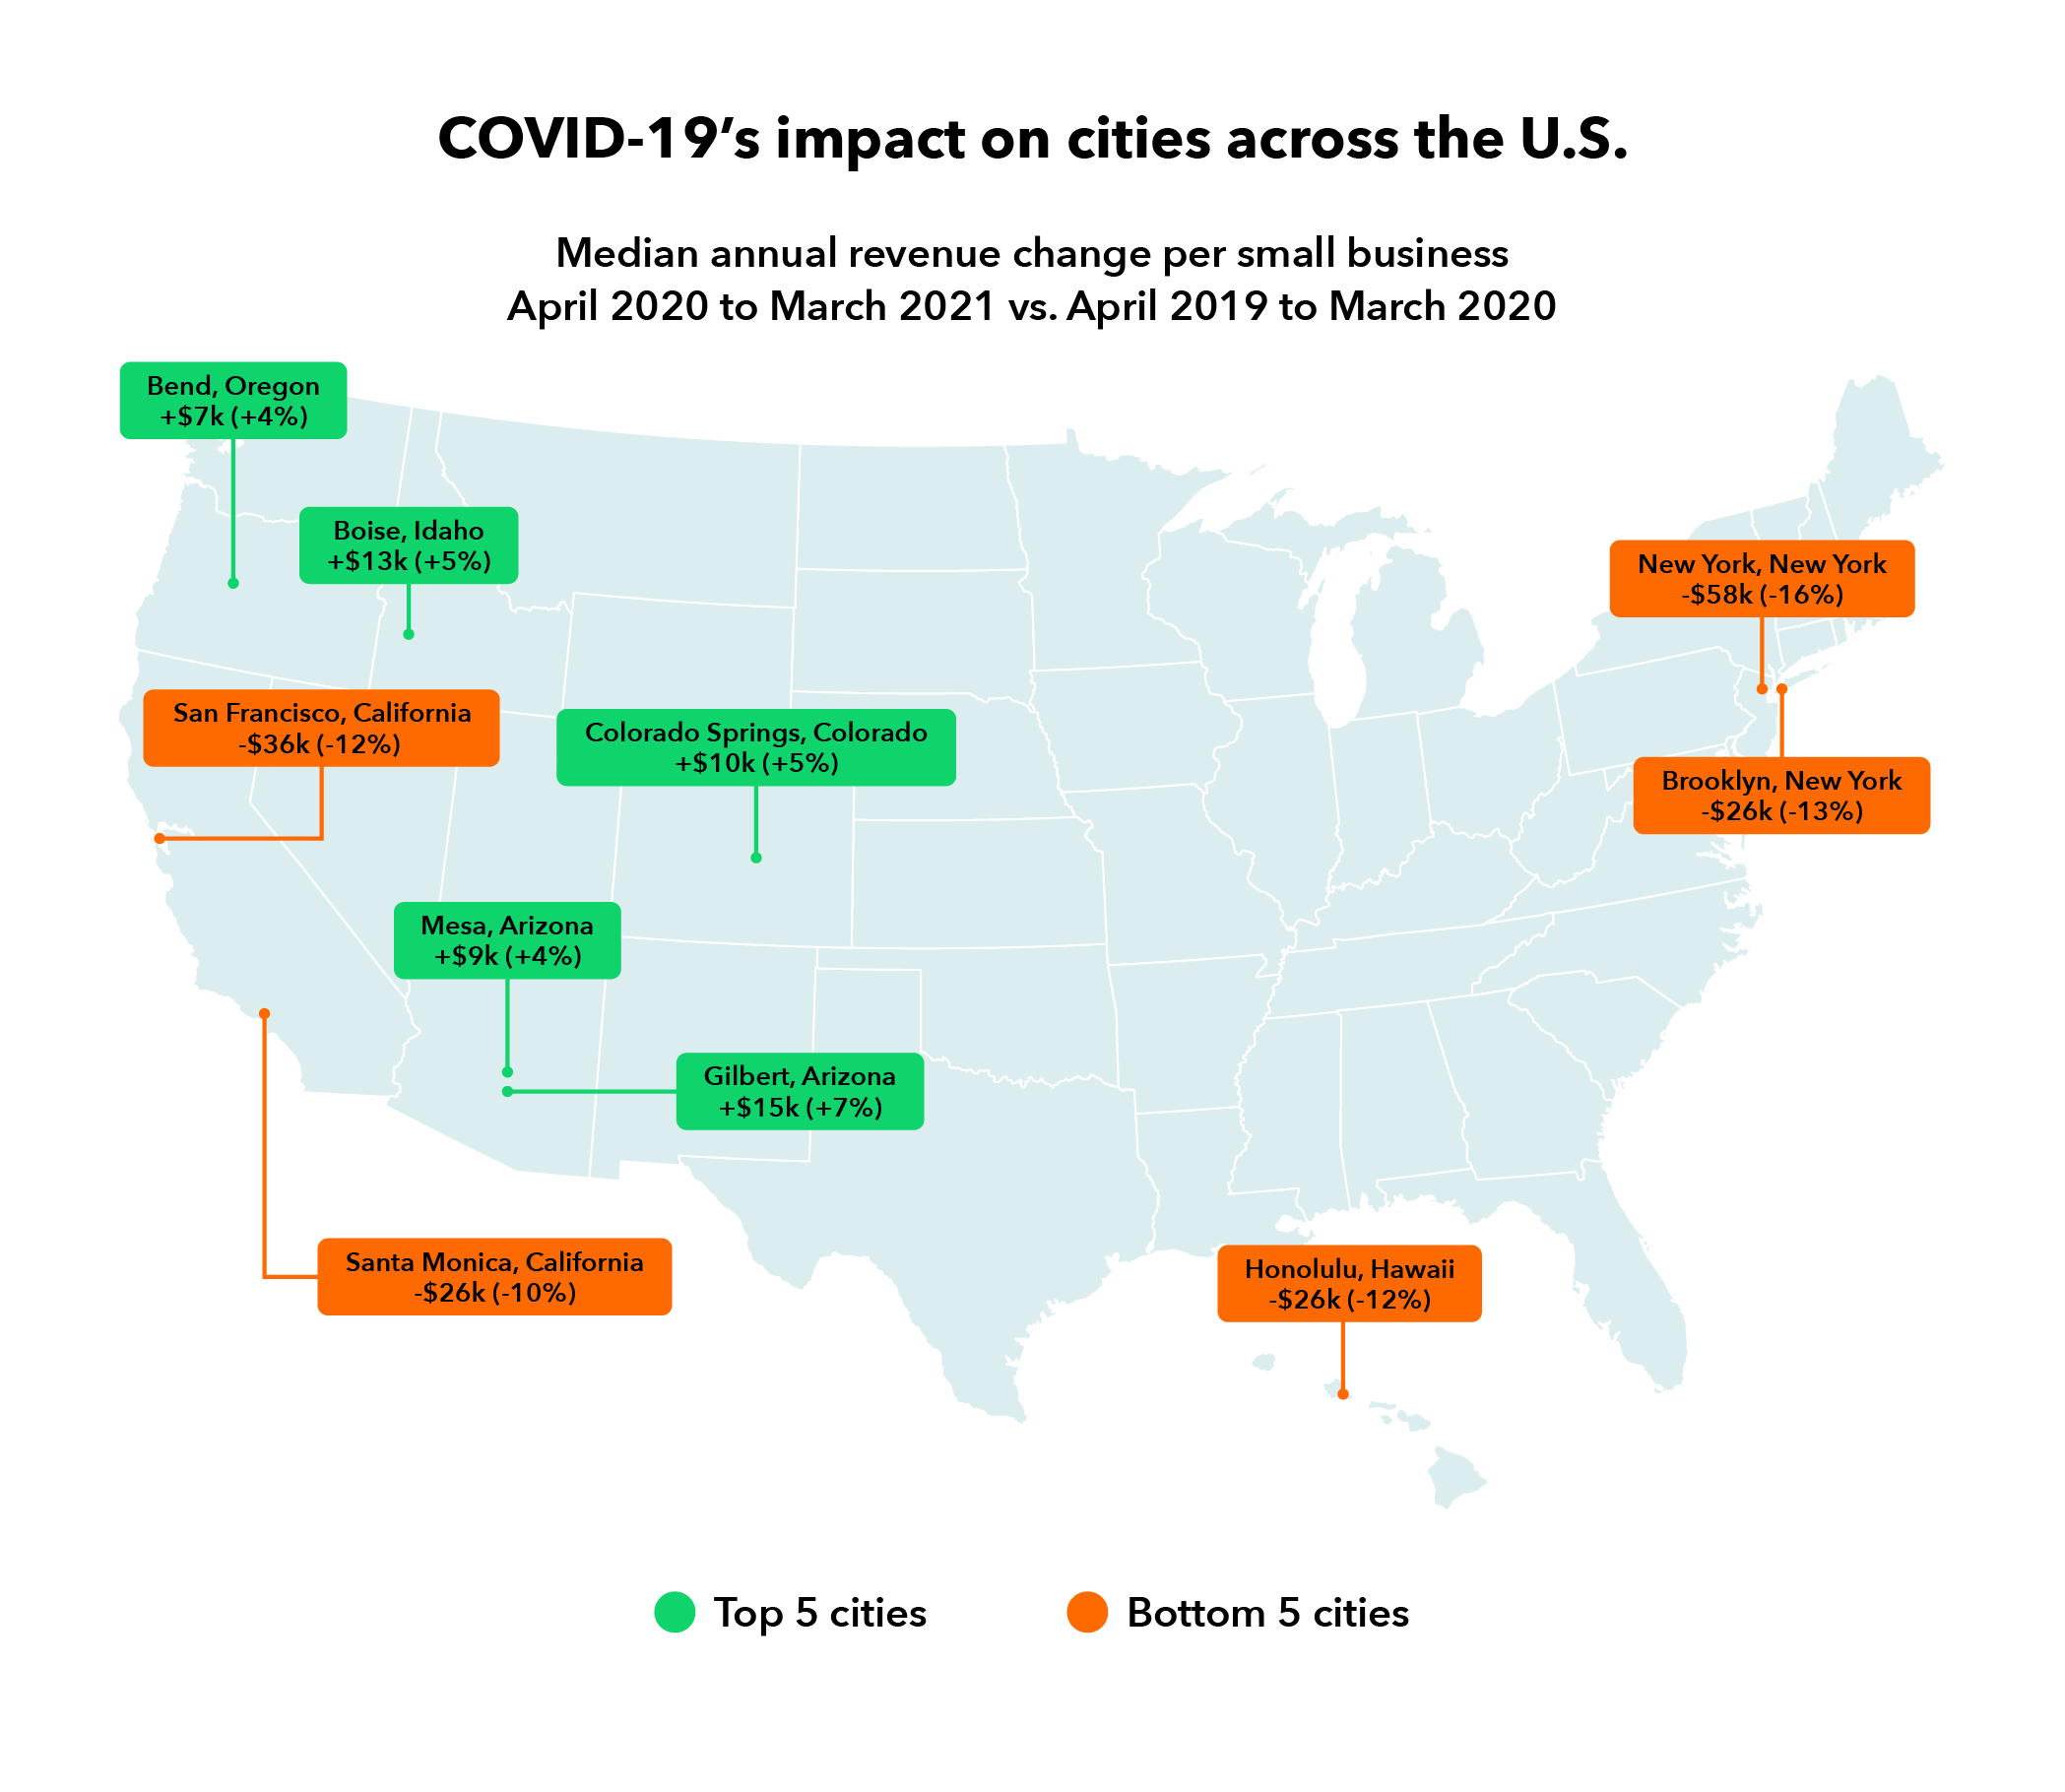 COVID-19's impact on cities and states across the US